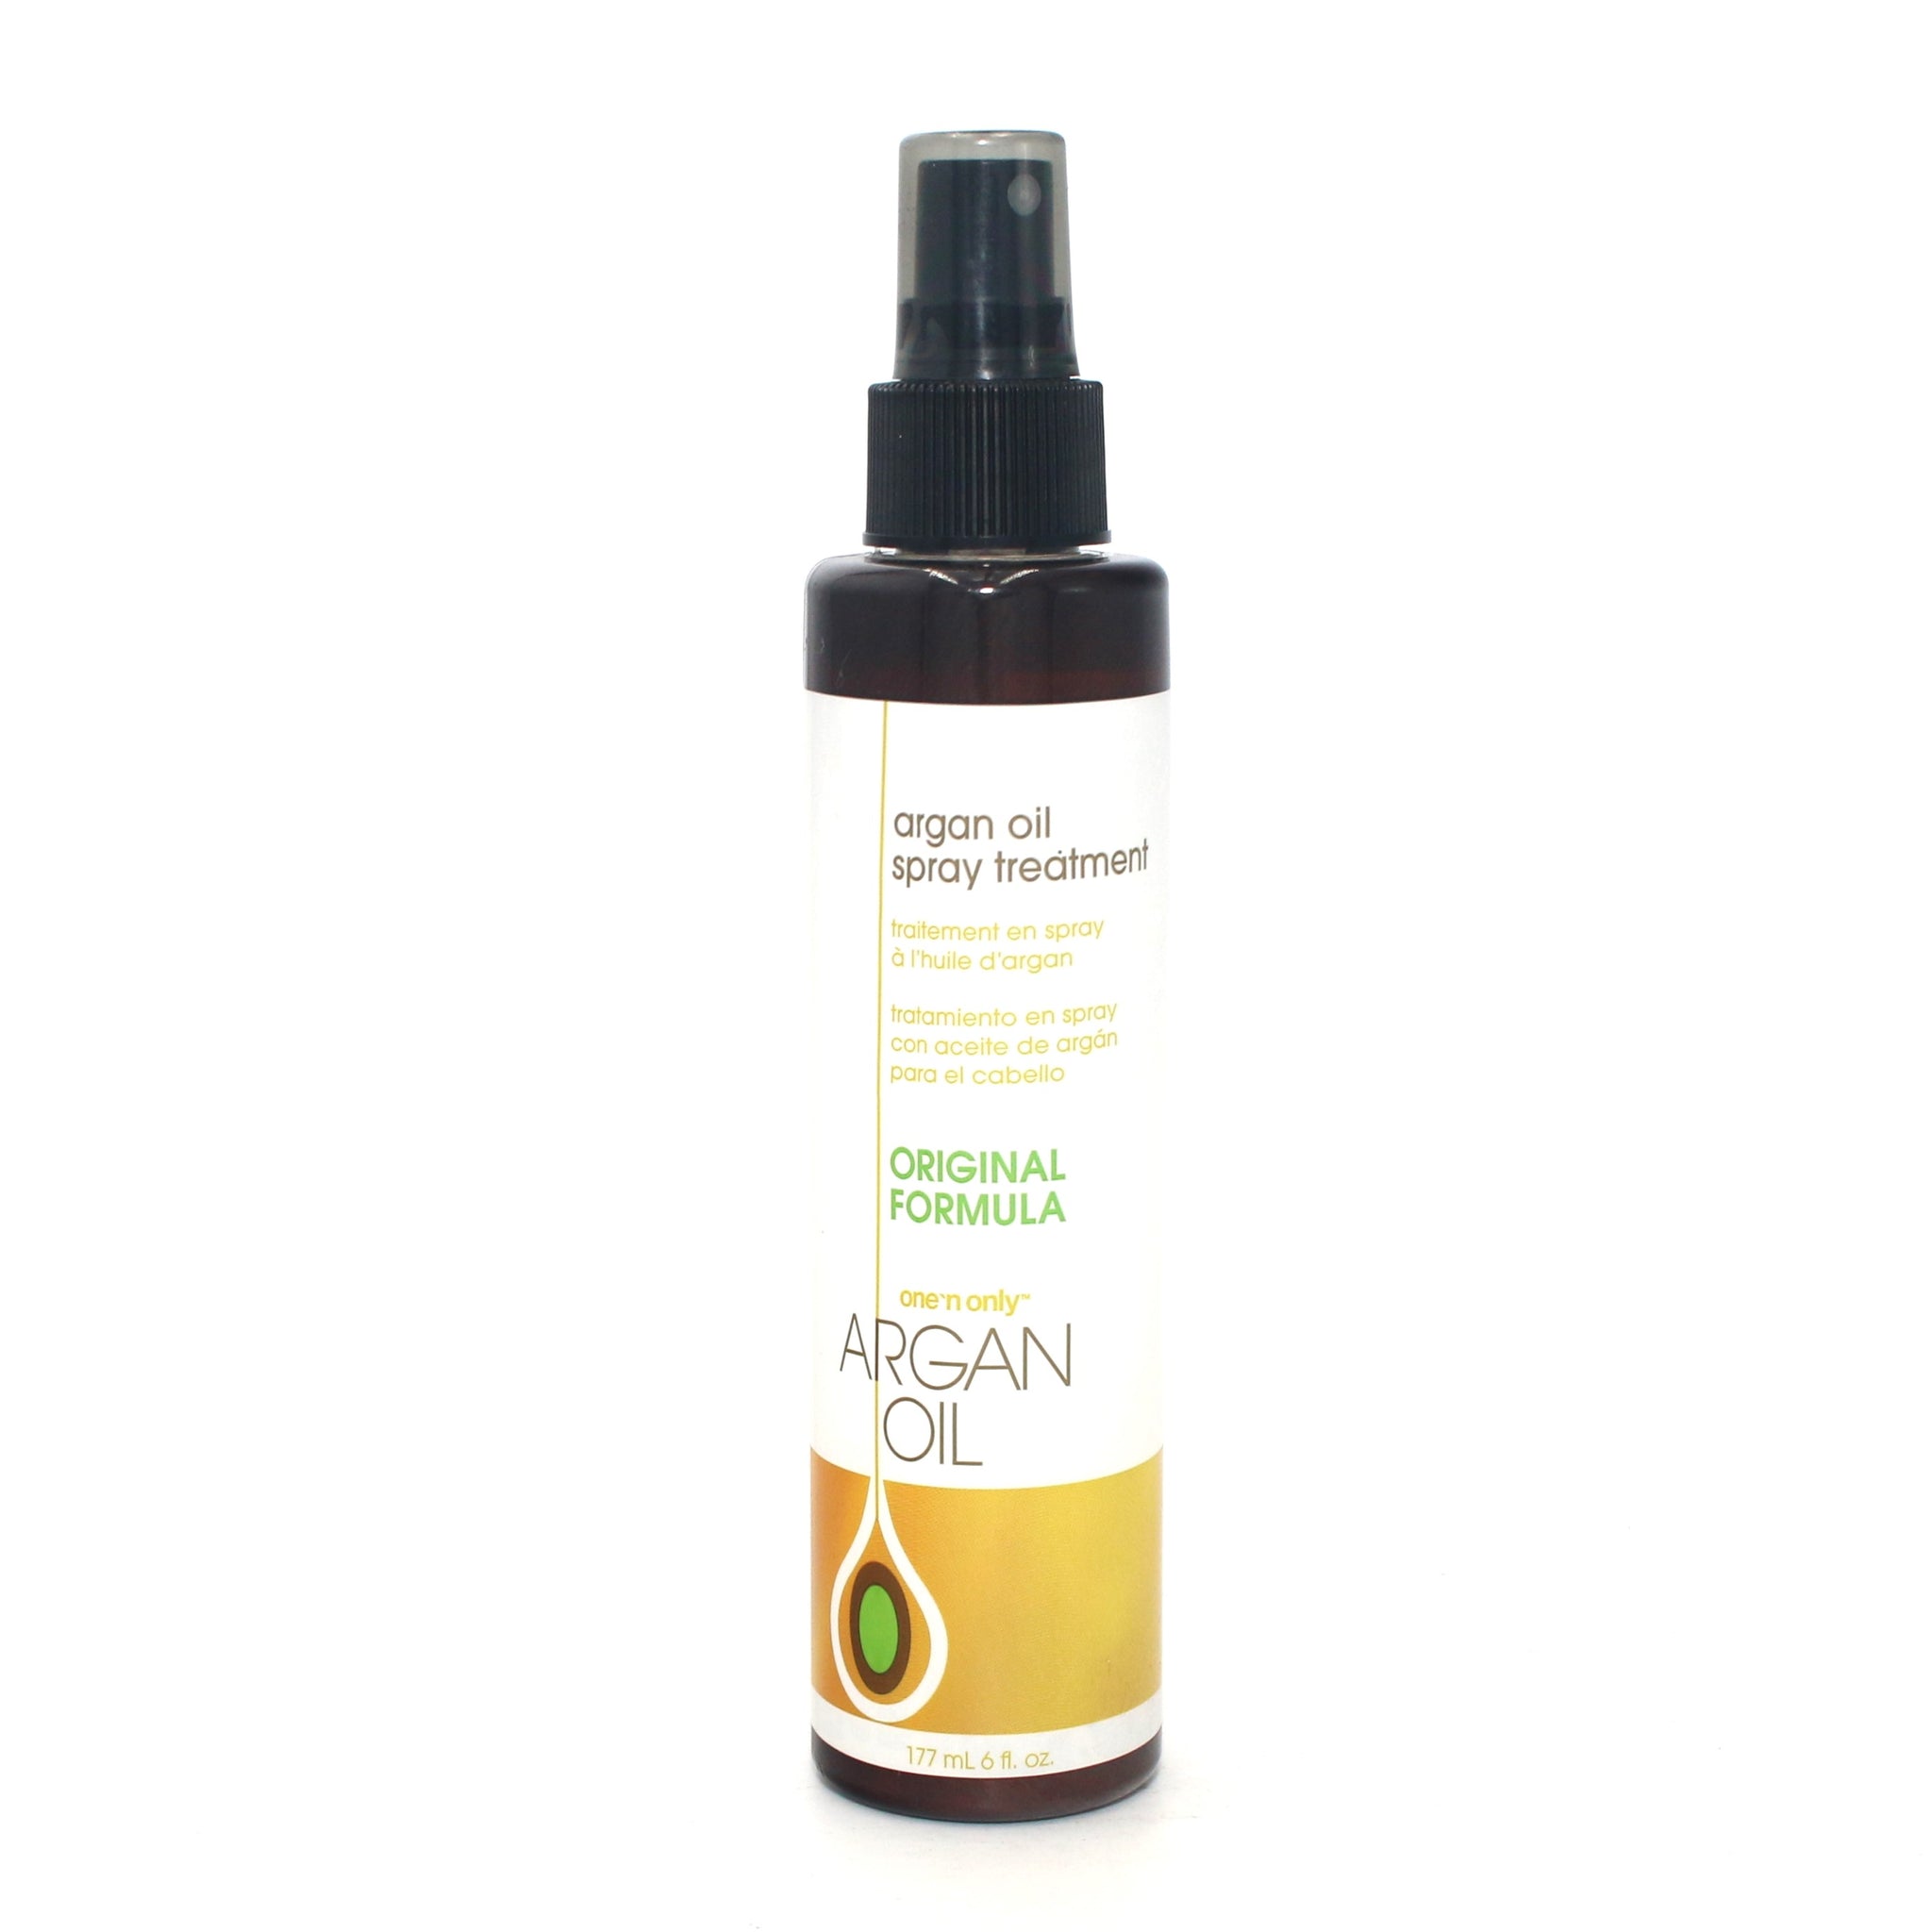 One and Only Argan Oil Spray Treatment 6 oz